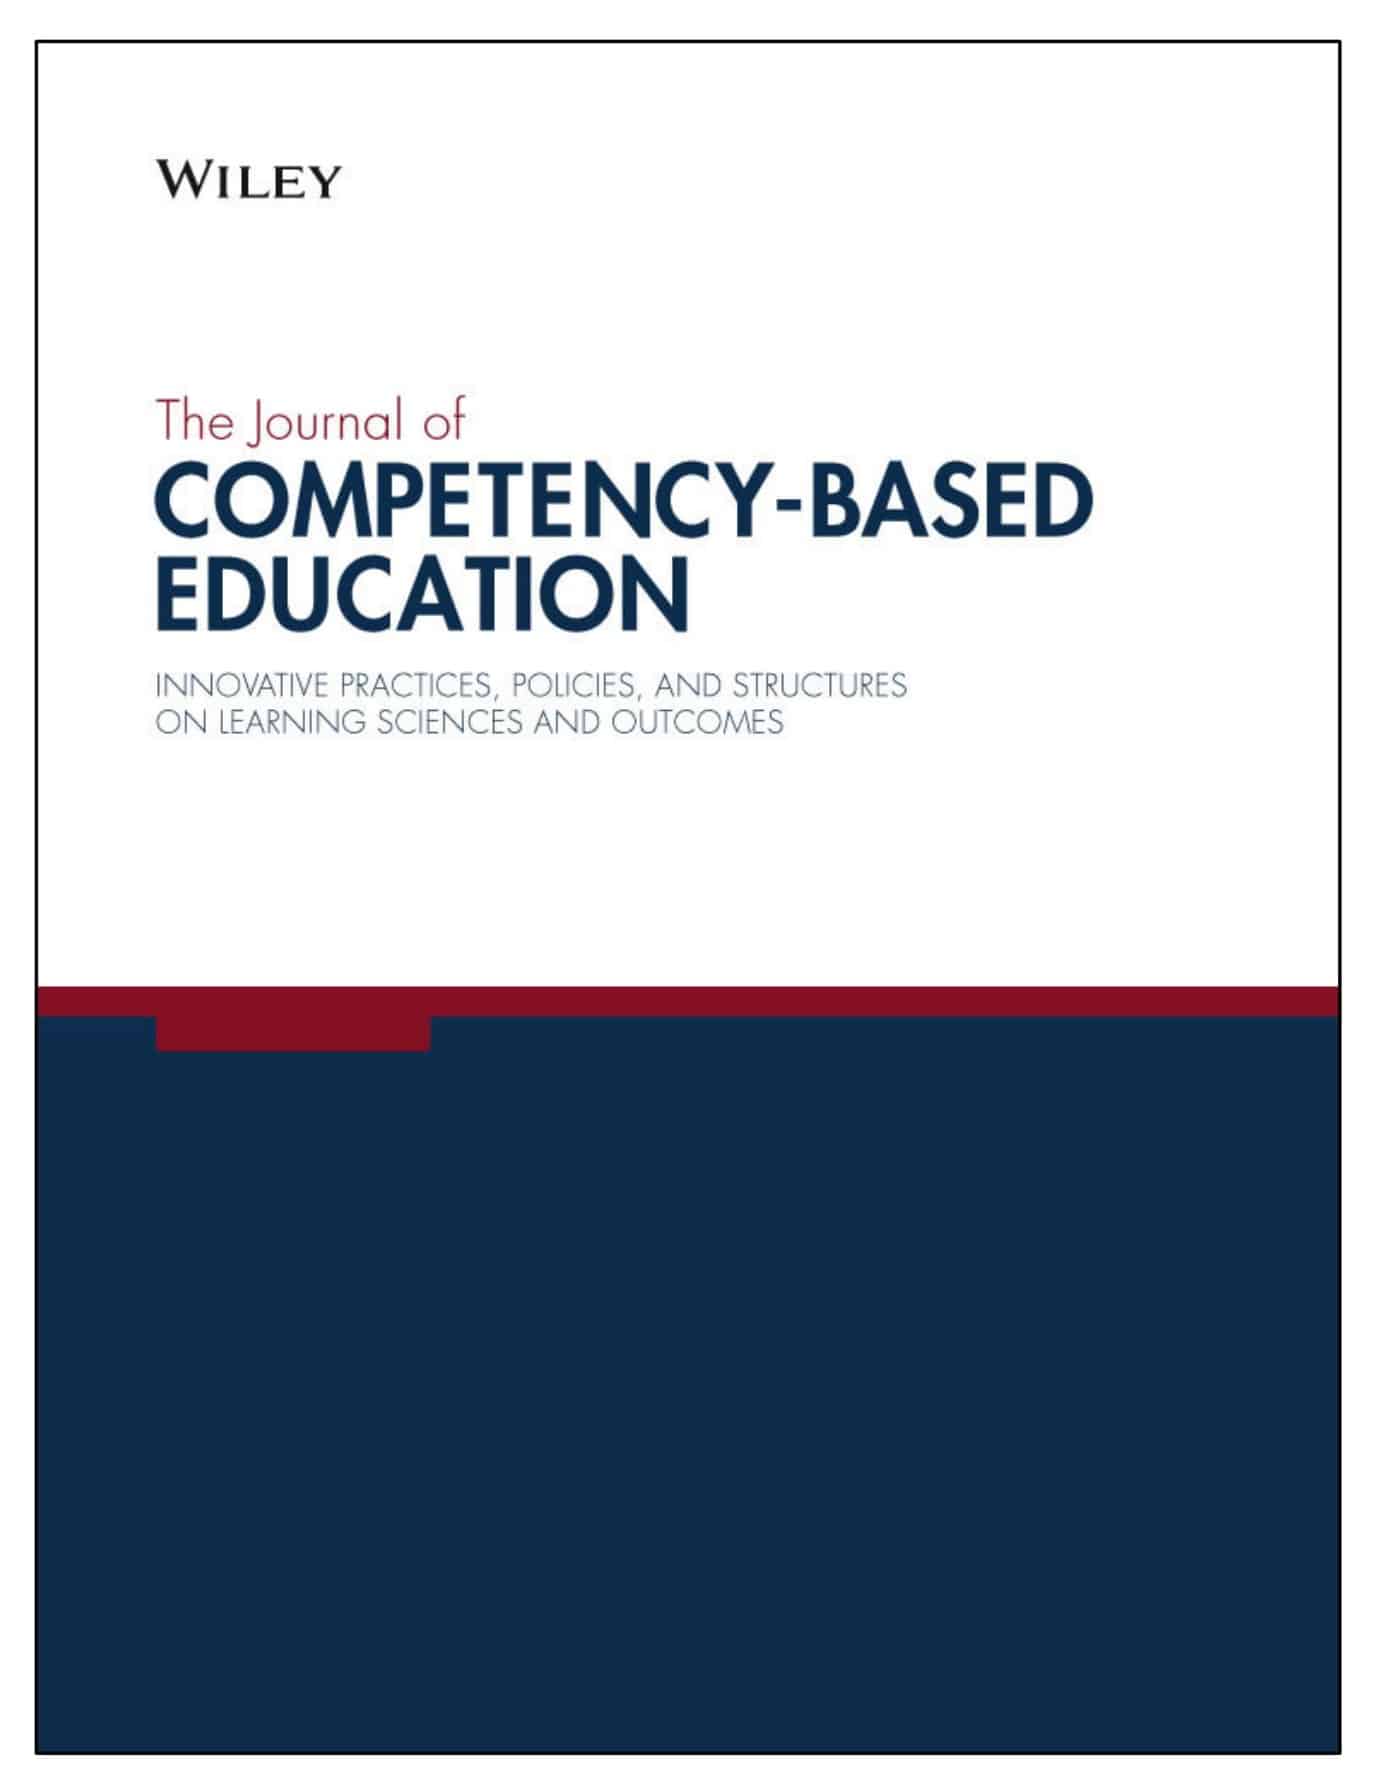 Cover of the Journal of Competency-Based Edudation